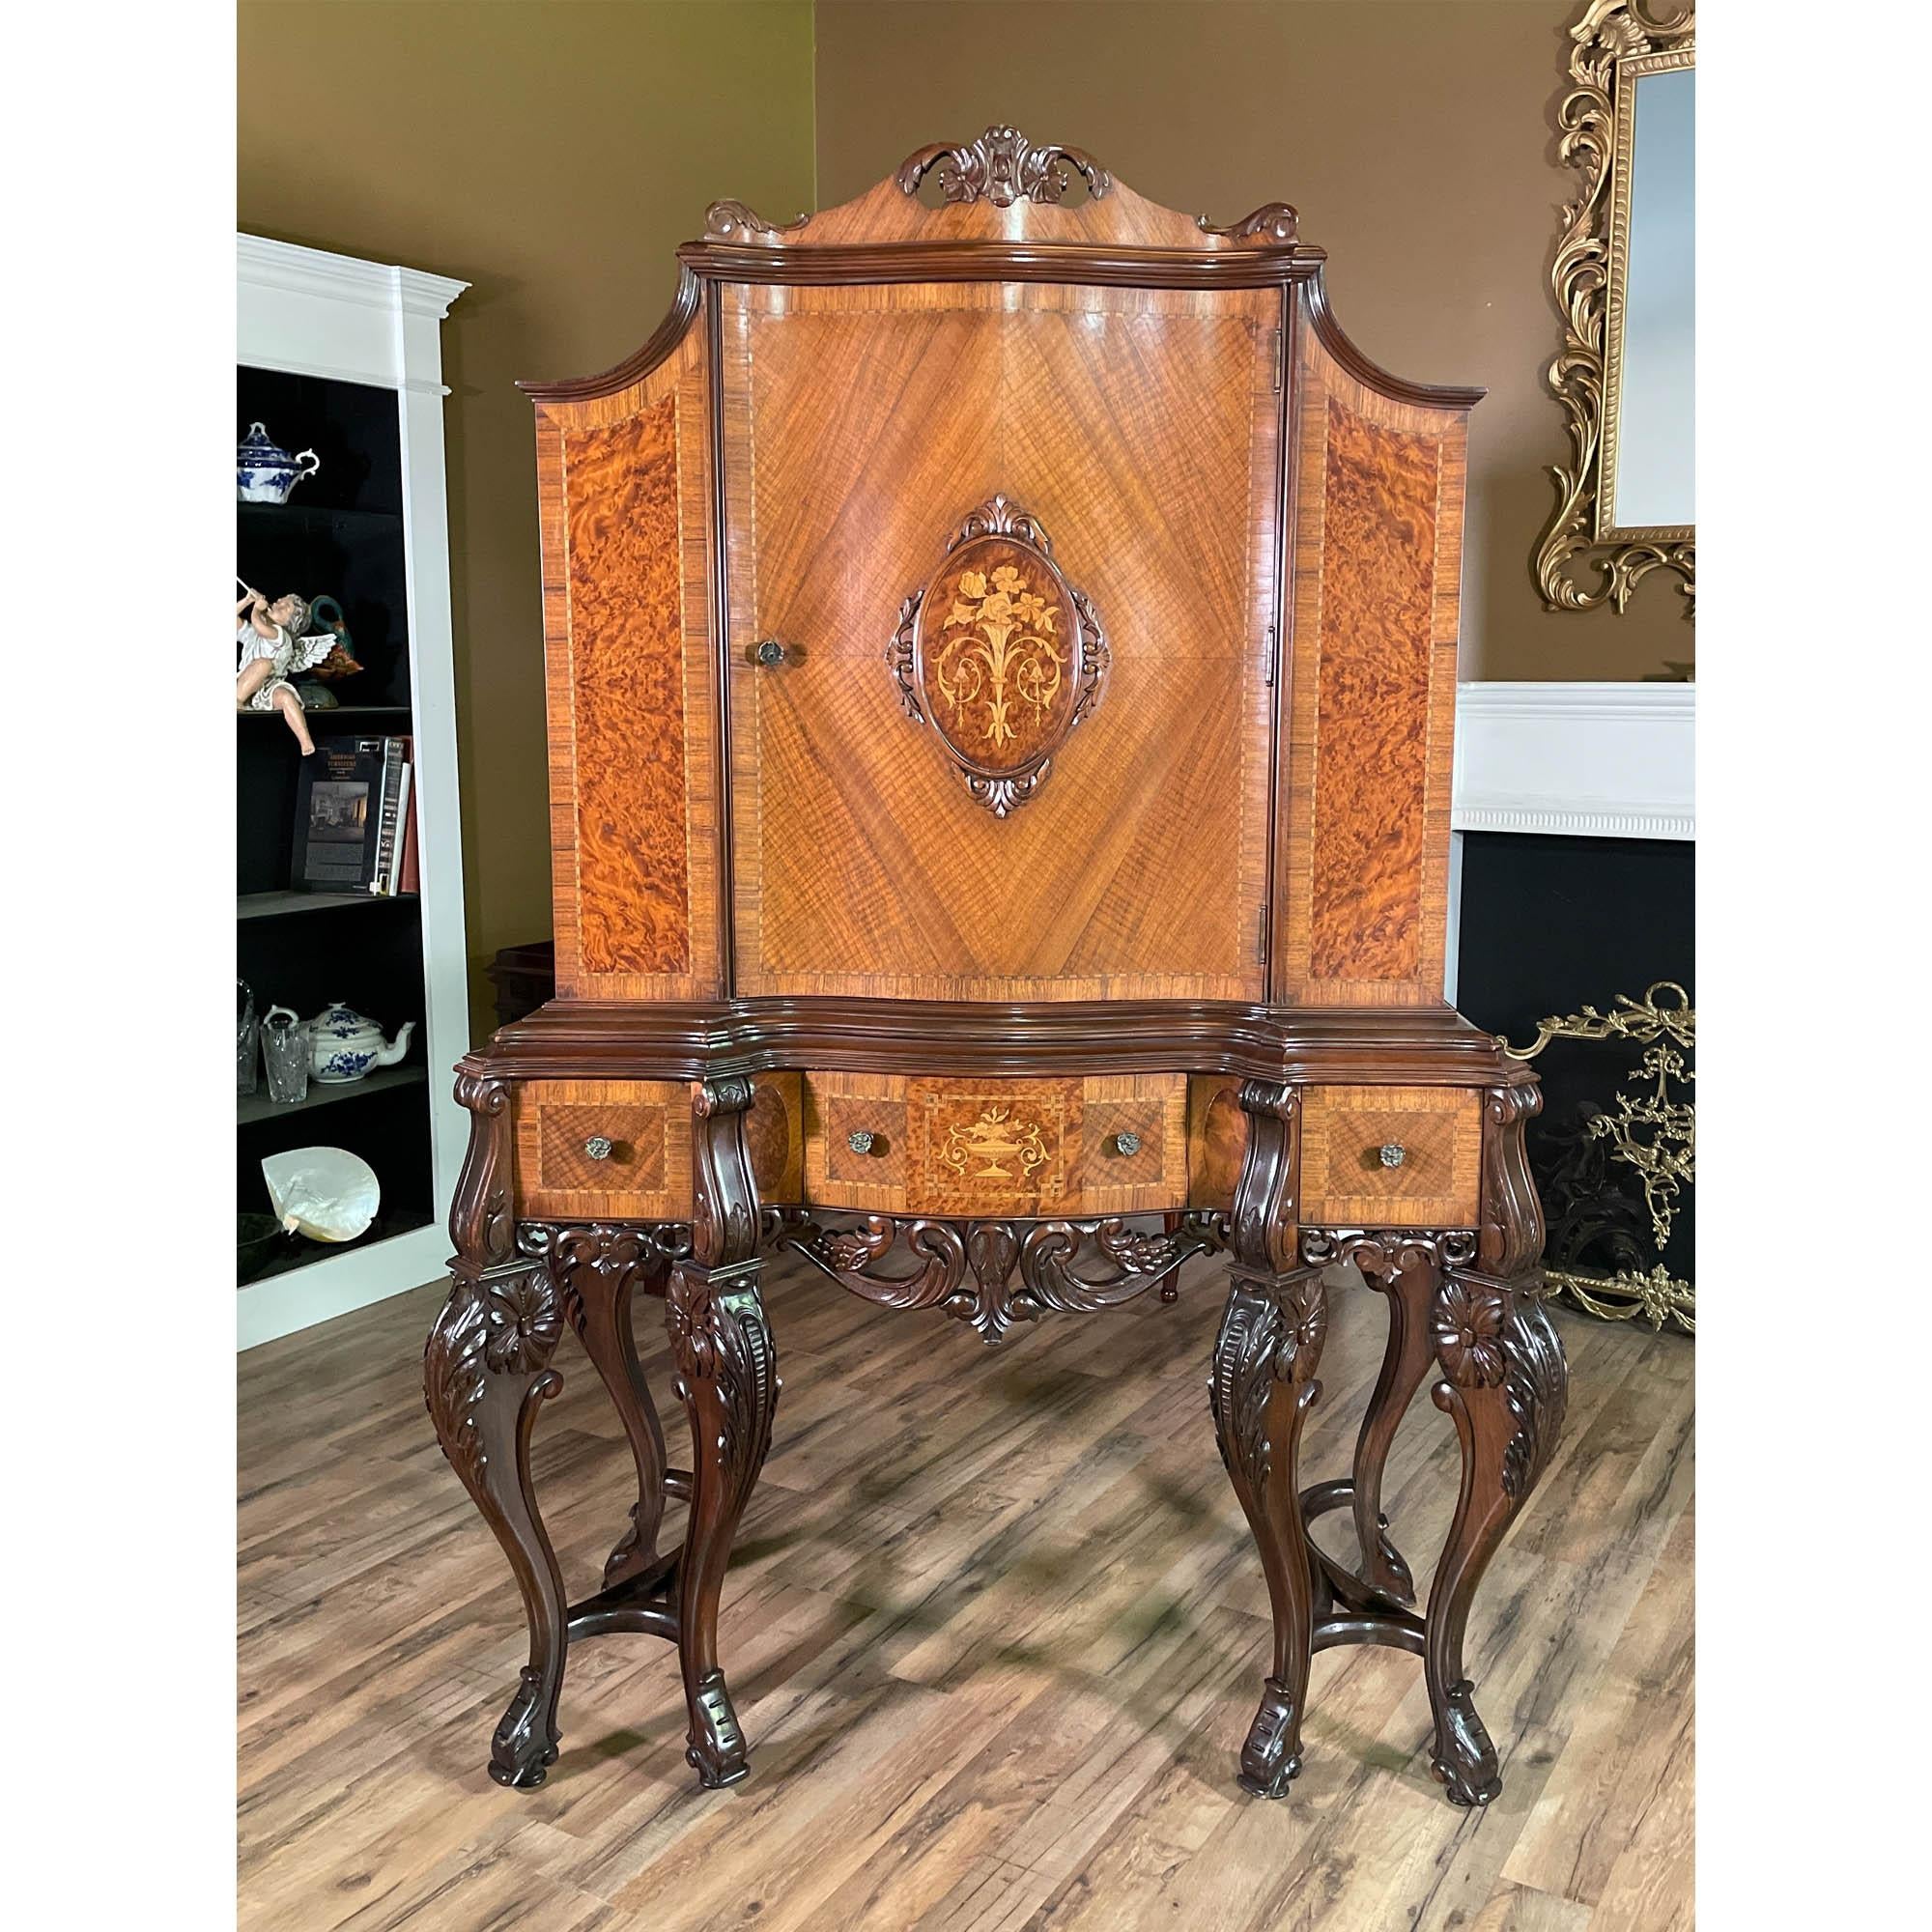 From Niagara Furniture, an Antique Walnut Inlaid China Cabinet in overall great original condition.

Finely crafted and incredibly detailed this beautiful Antique Walnut Inlaid China Cabinet has everything one could ask for as a focal point for the